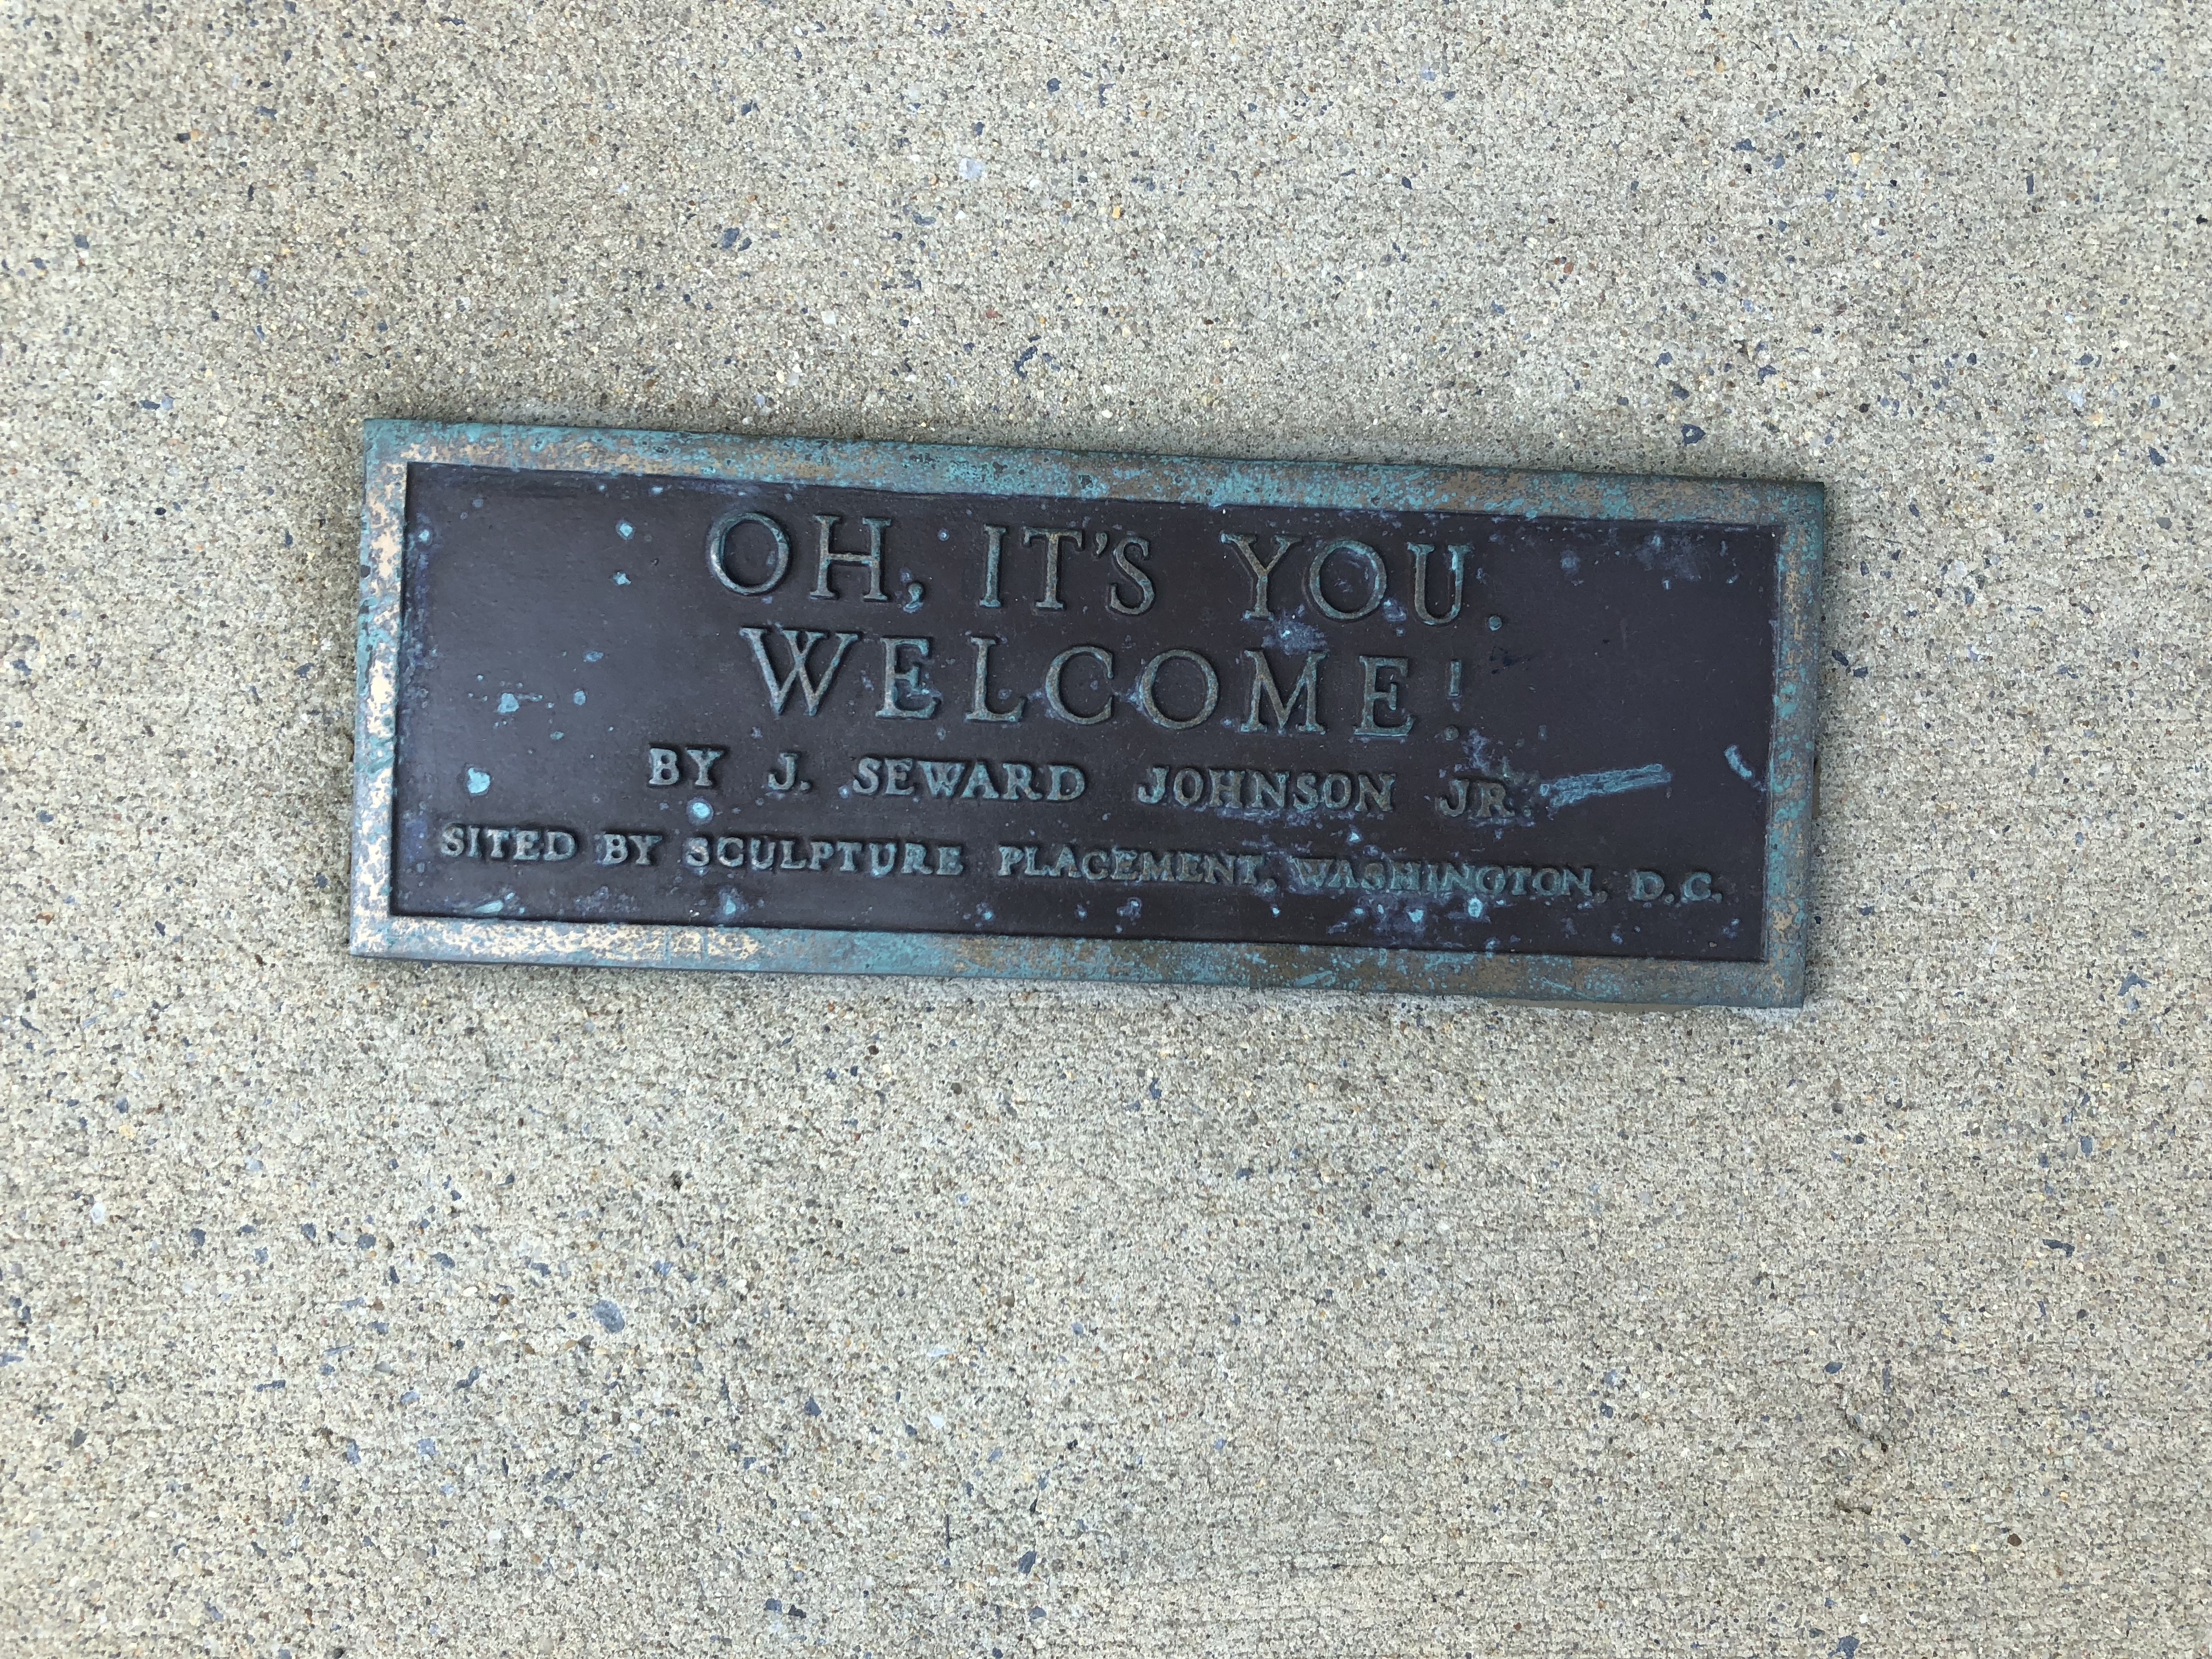 Plaque in front of statue